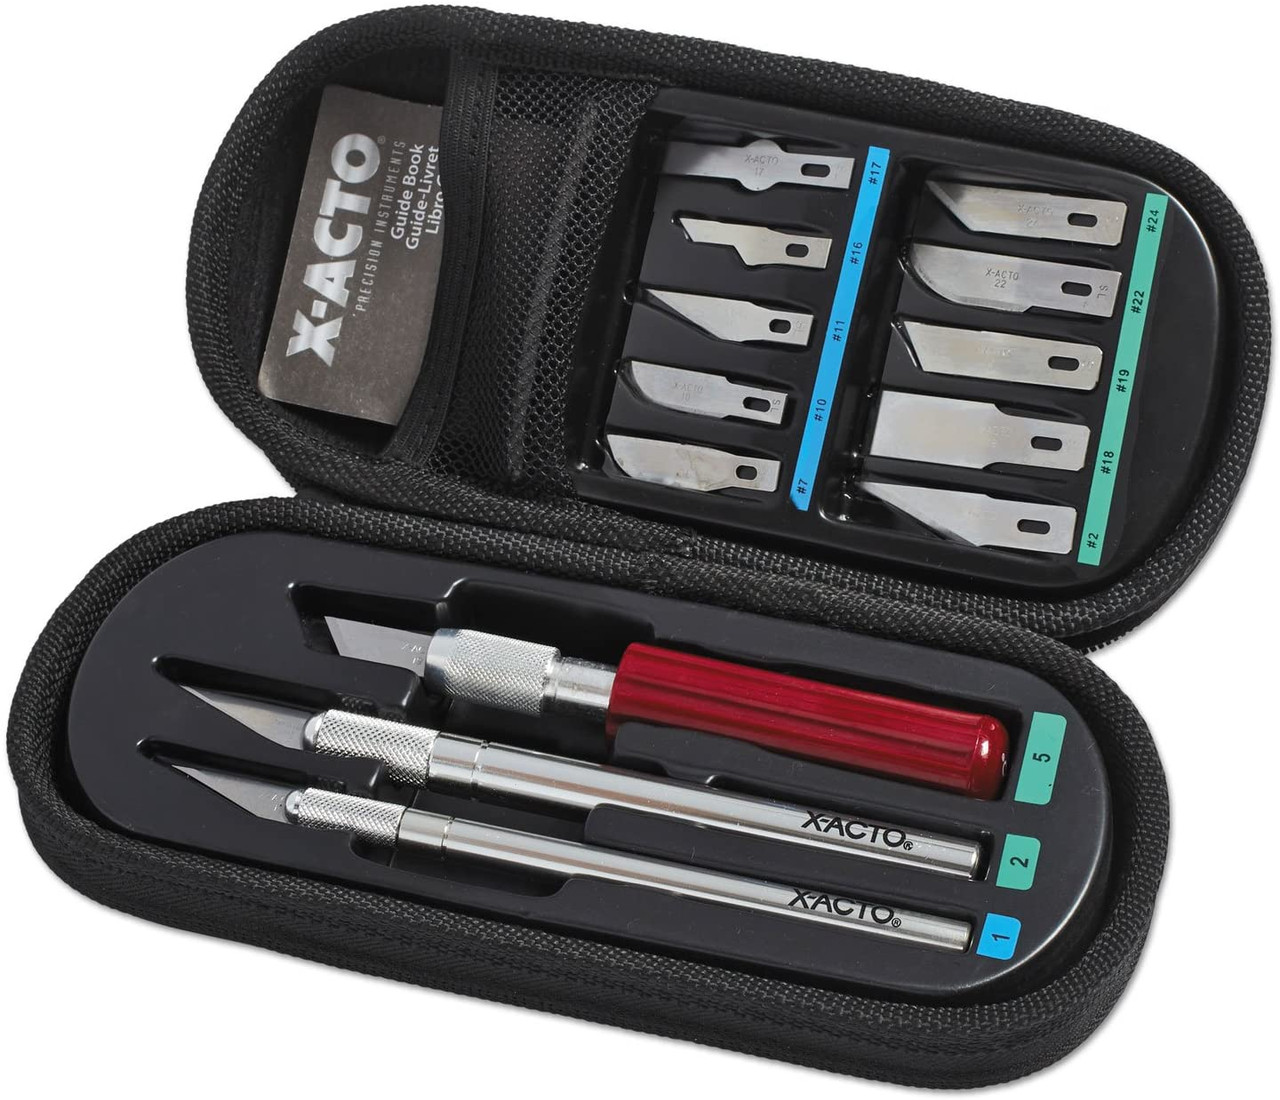 X-Acto X5285 Knife Set with Carrying Case